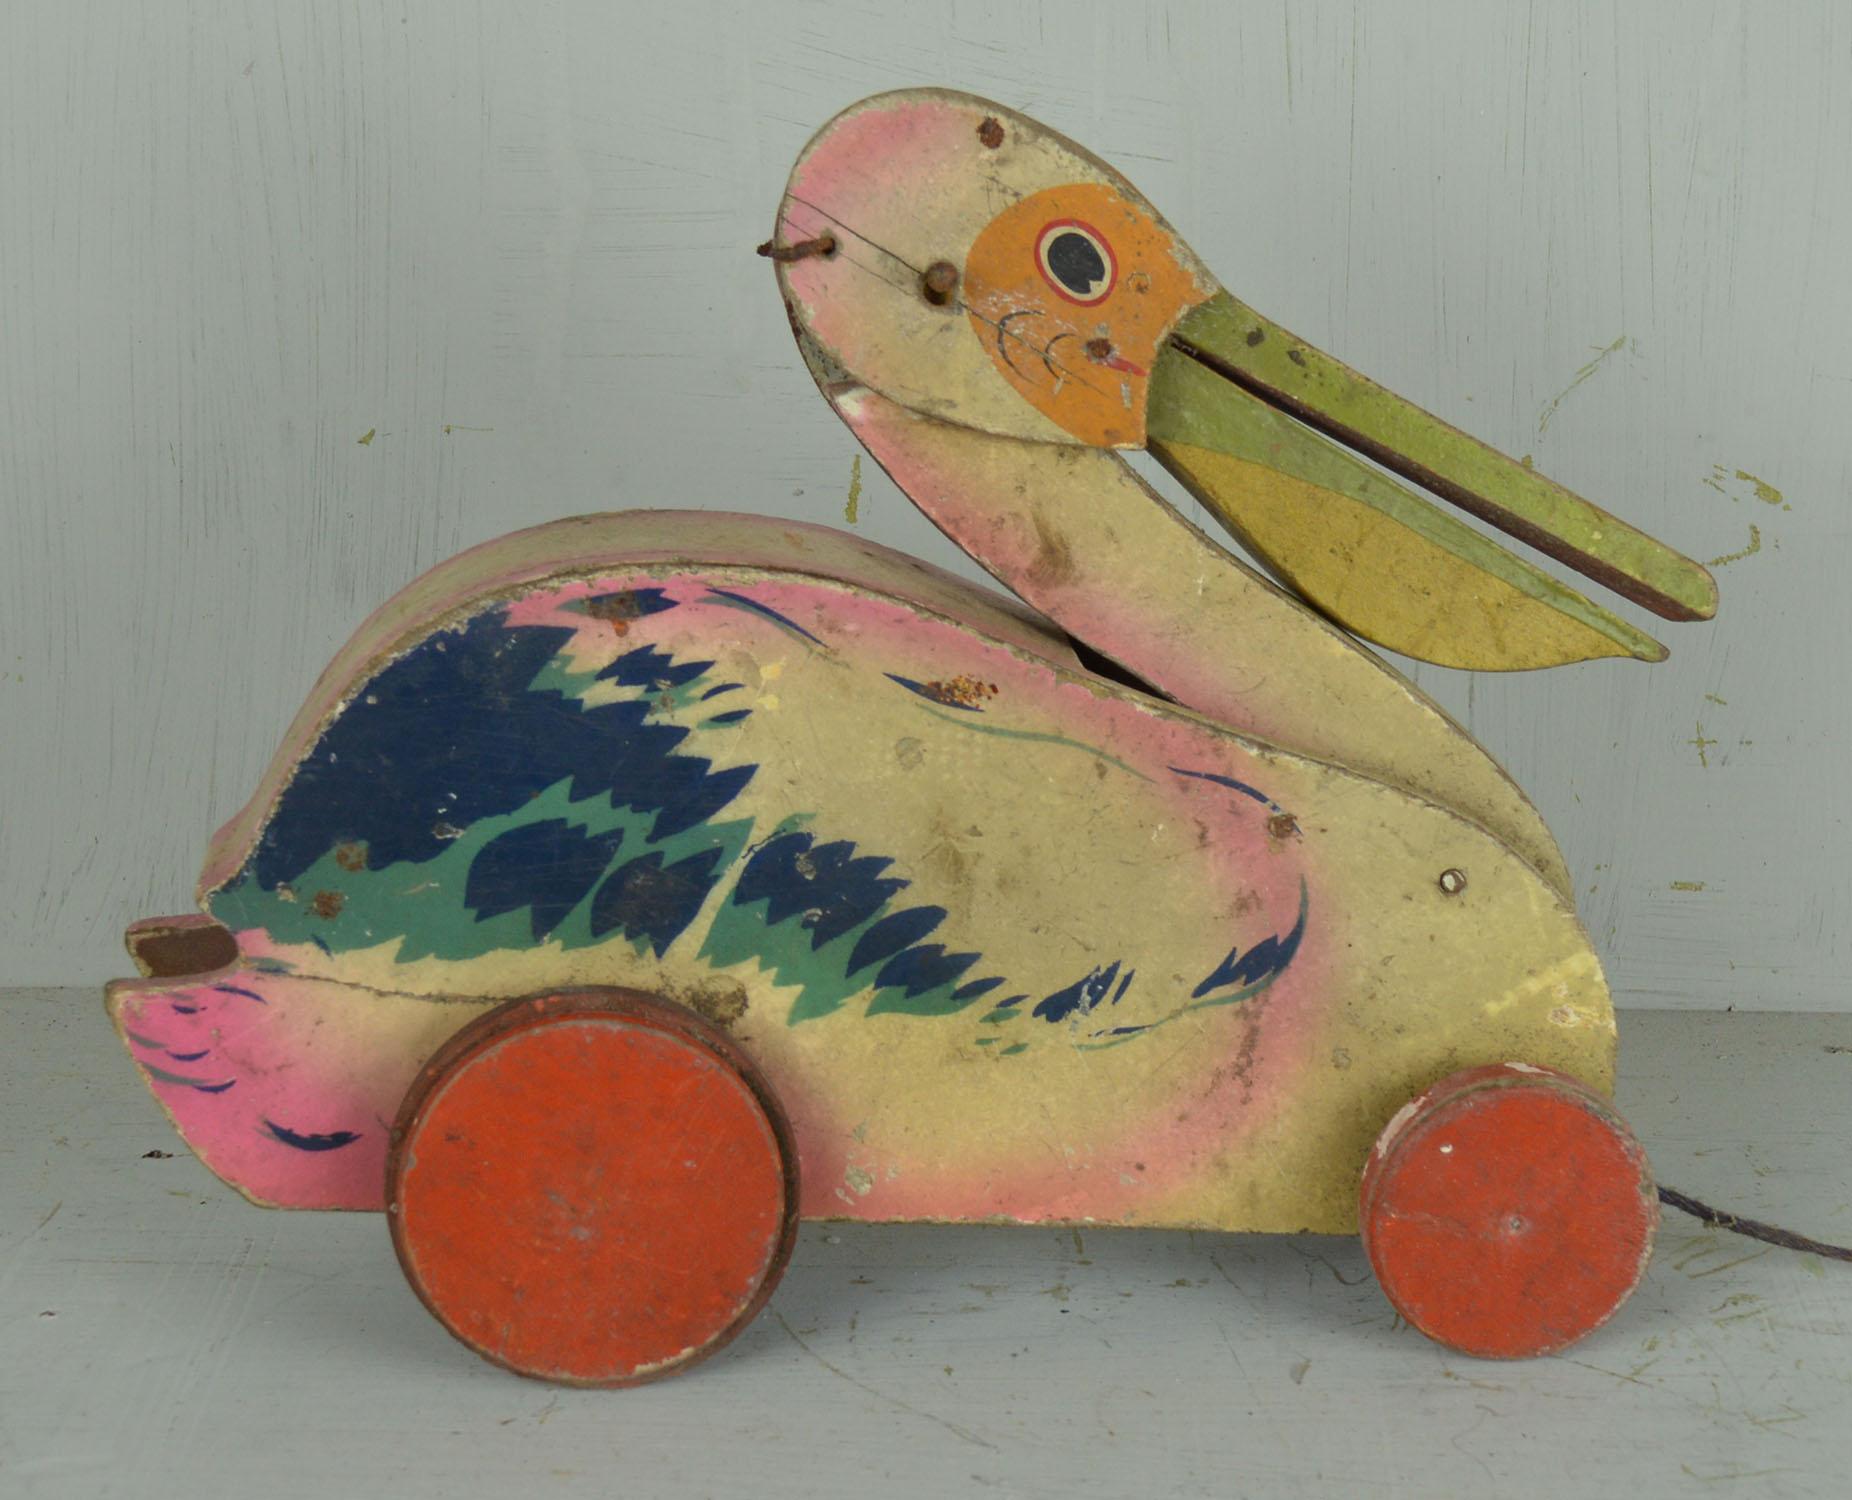 Charming little painted wood pelican toy.

The head moves and beak opens when pulled along.

Original paint.